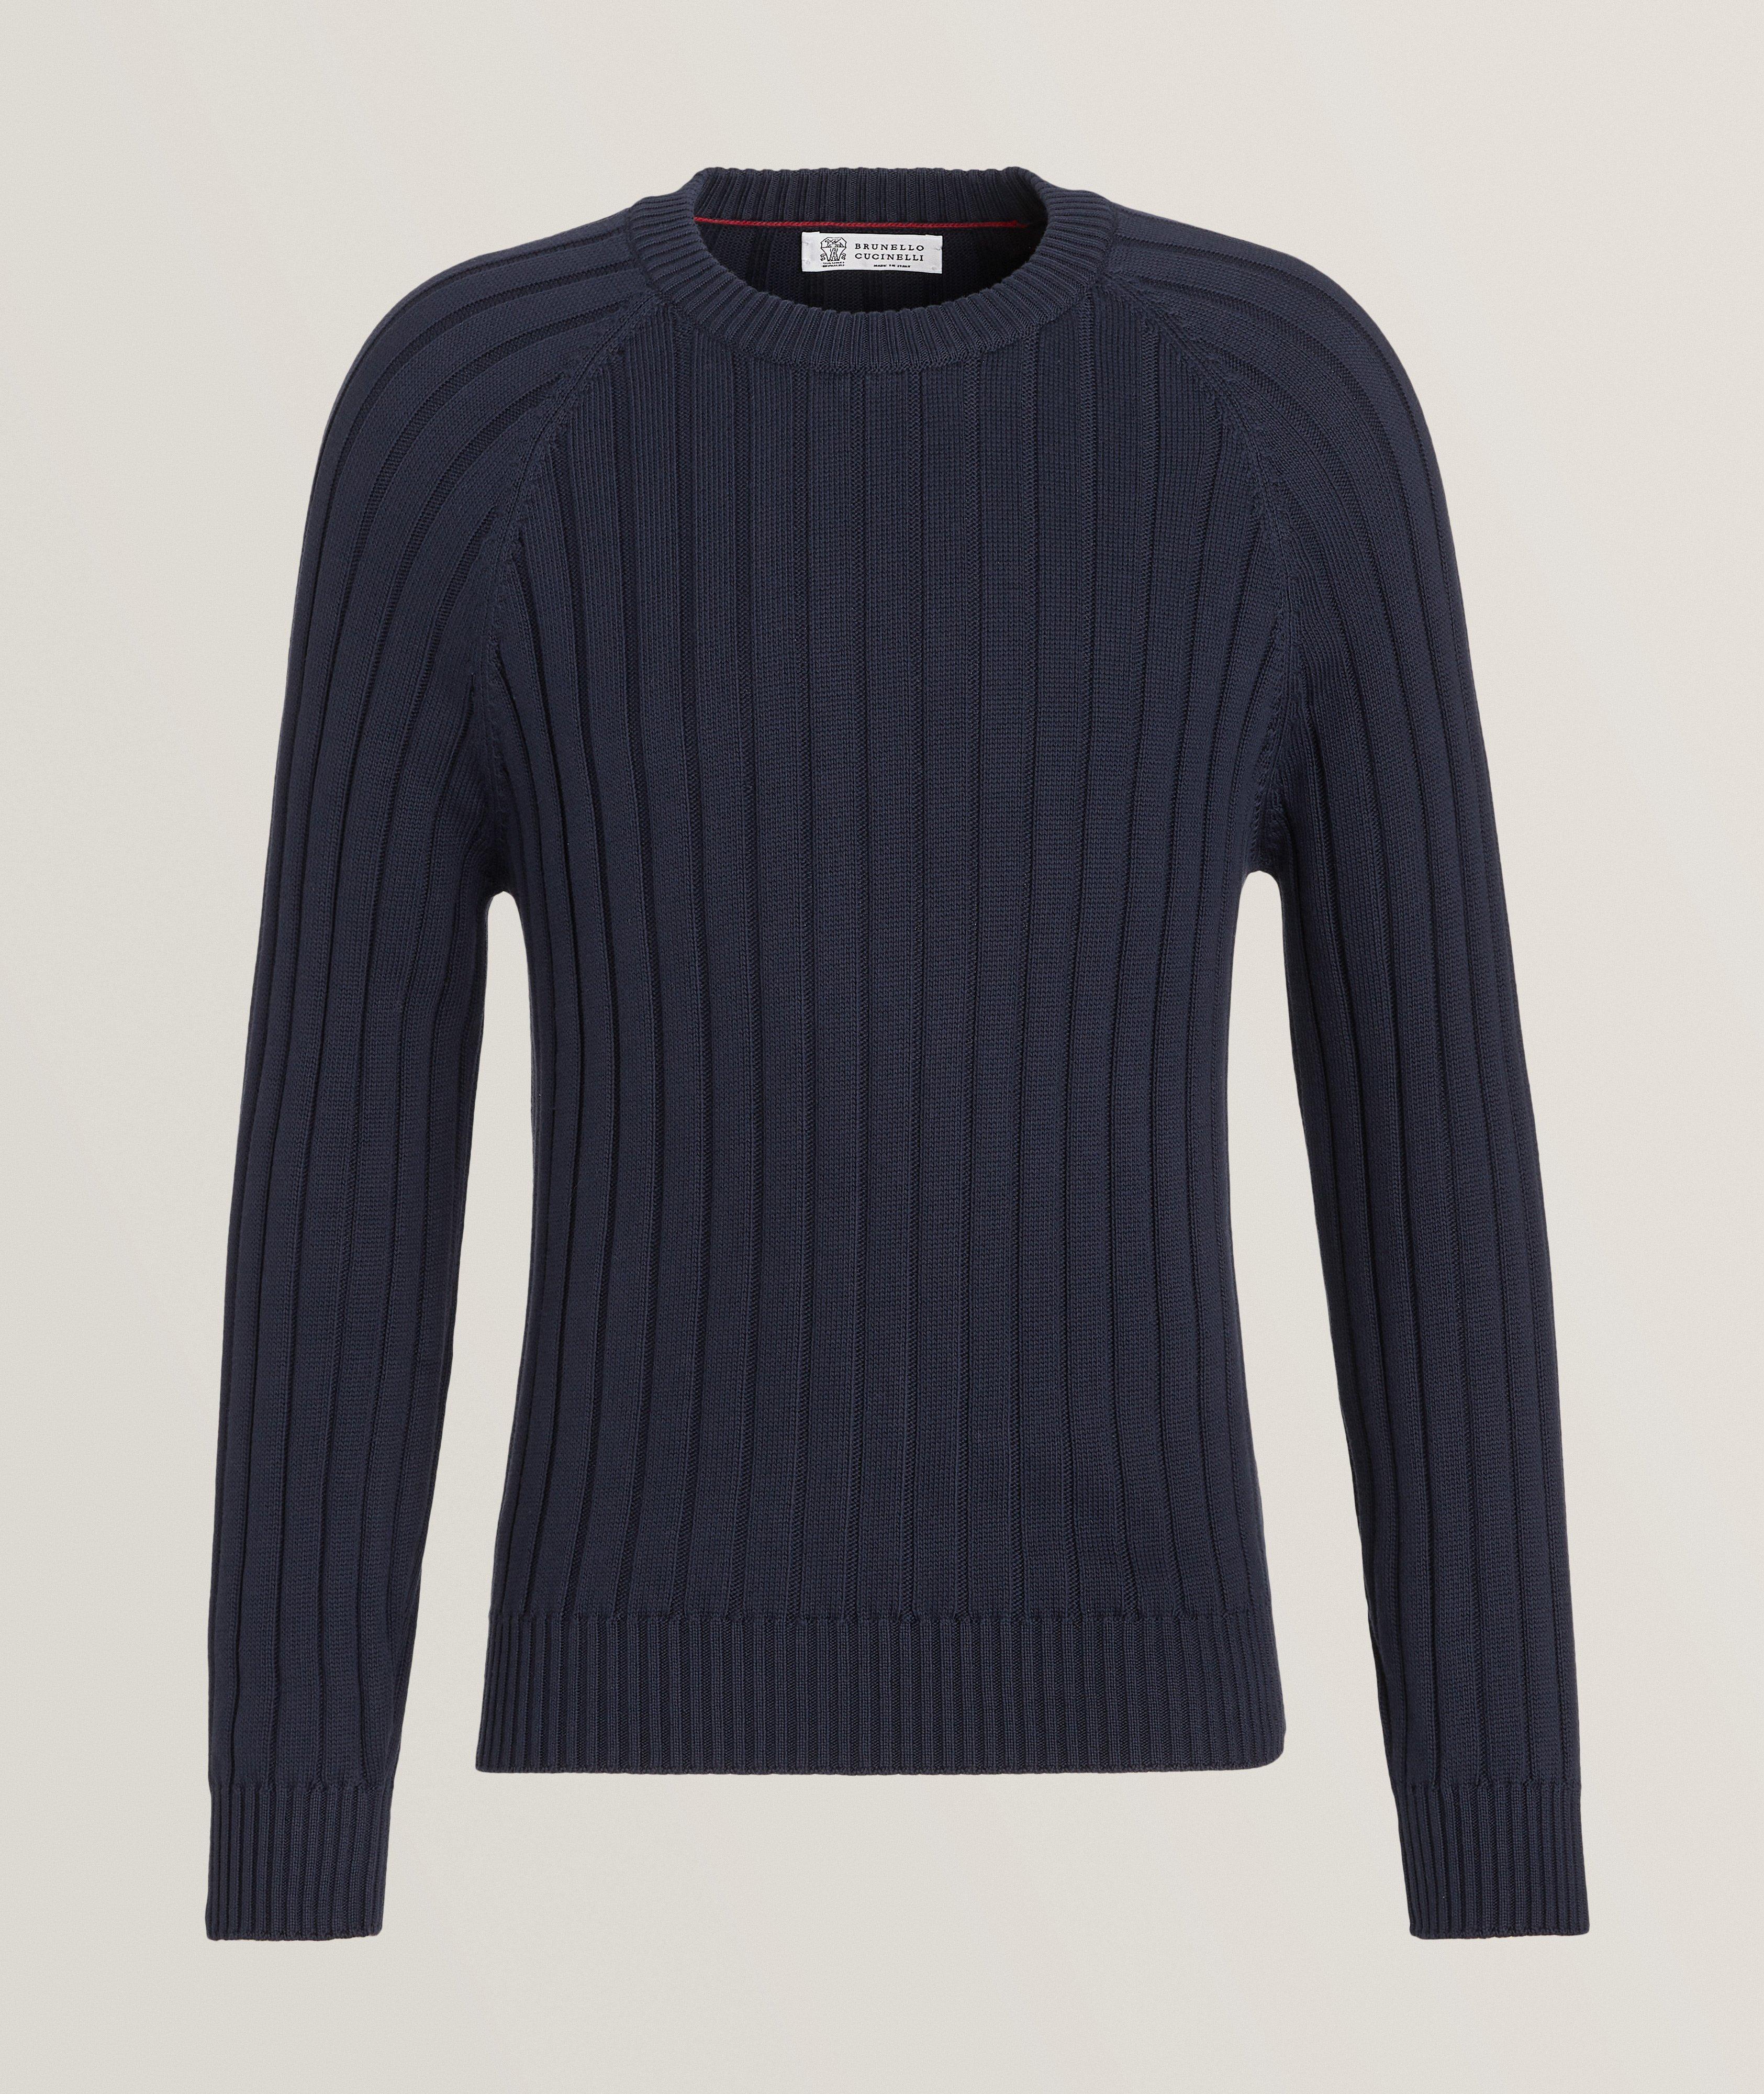 Ribbed Cotton Sweater image 0